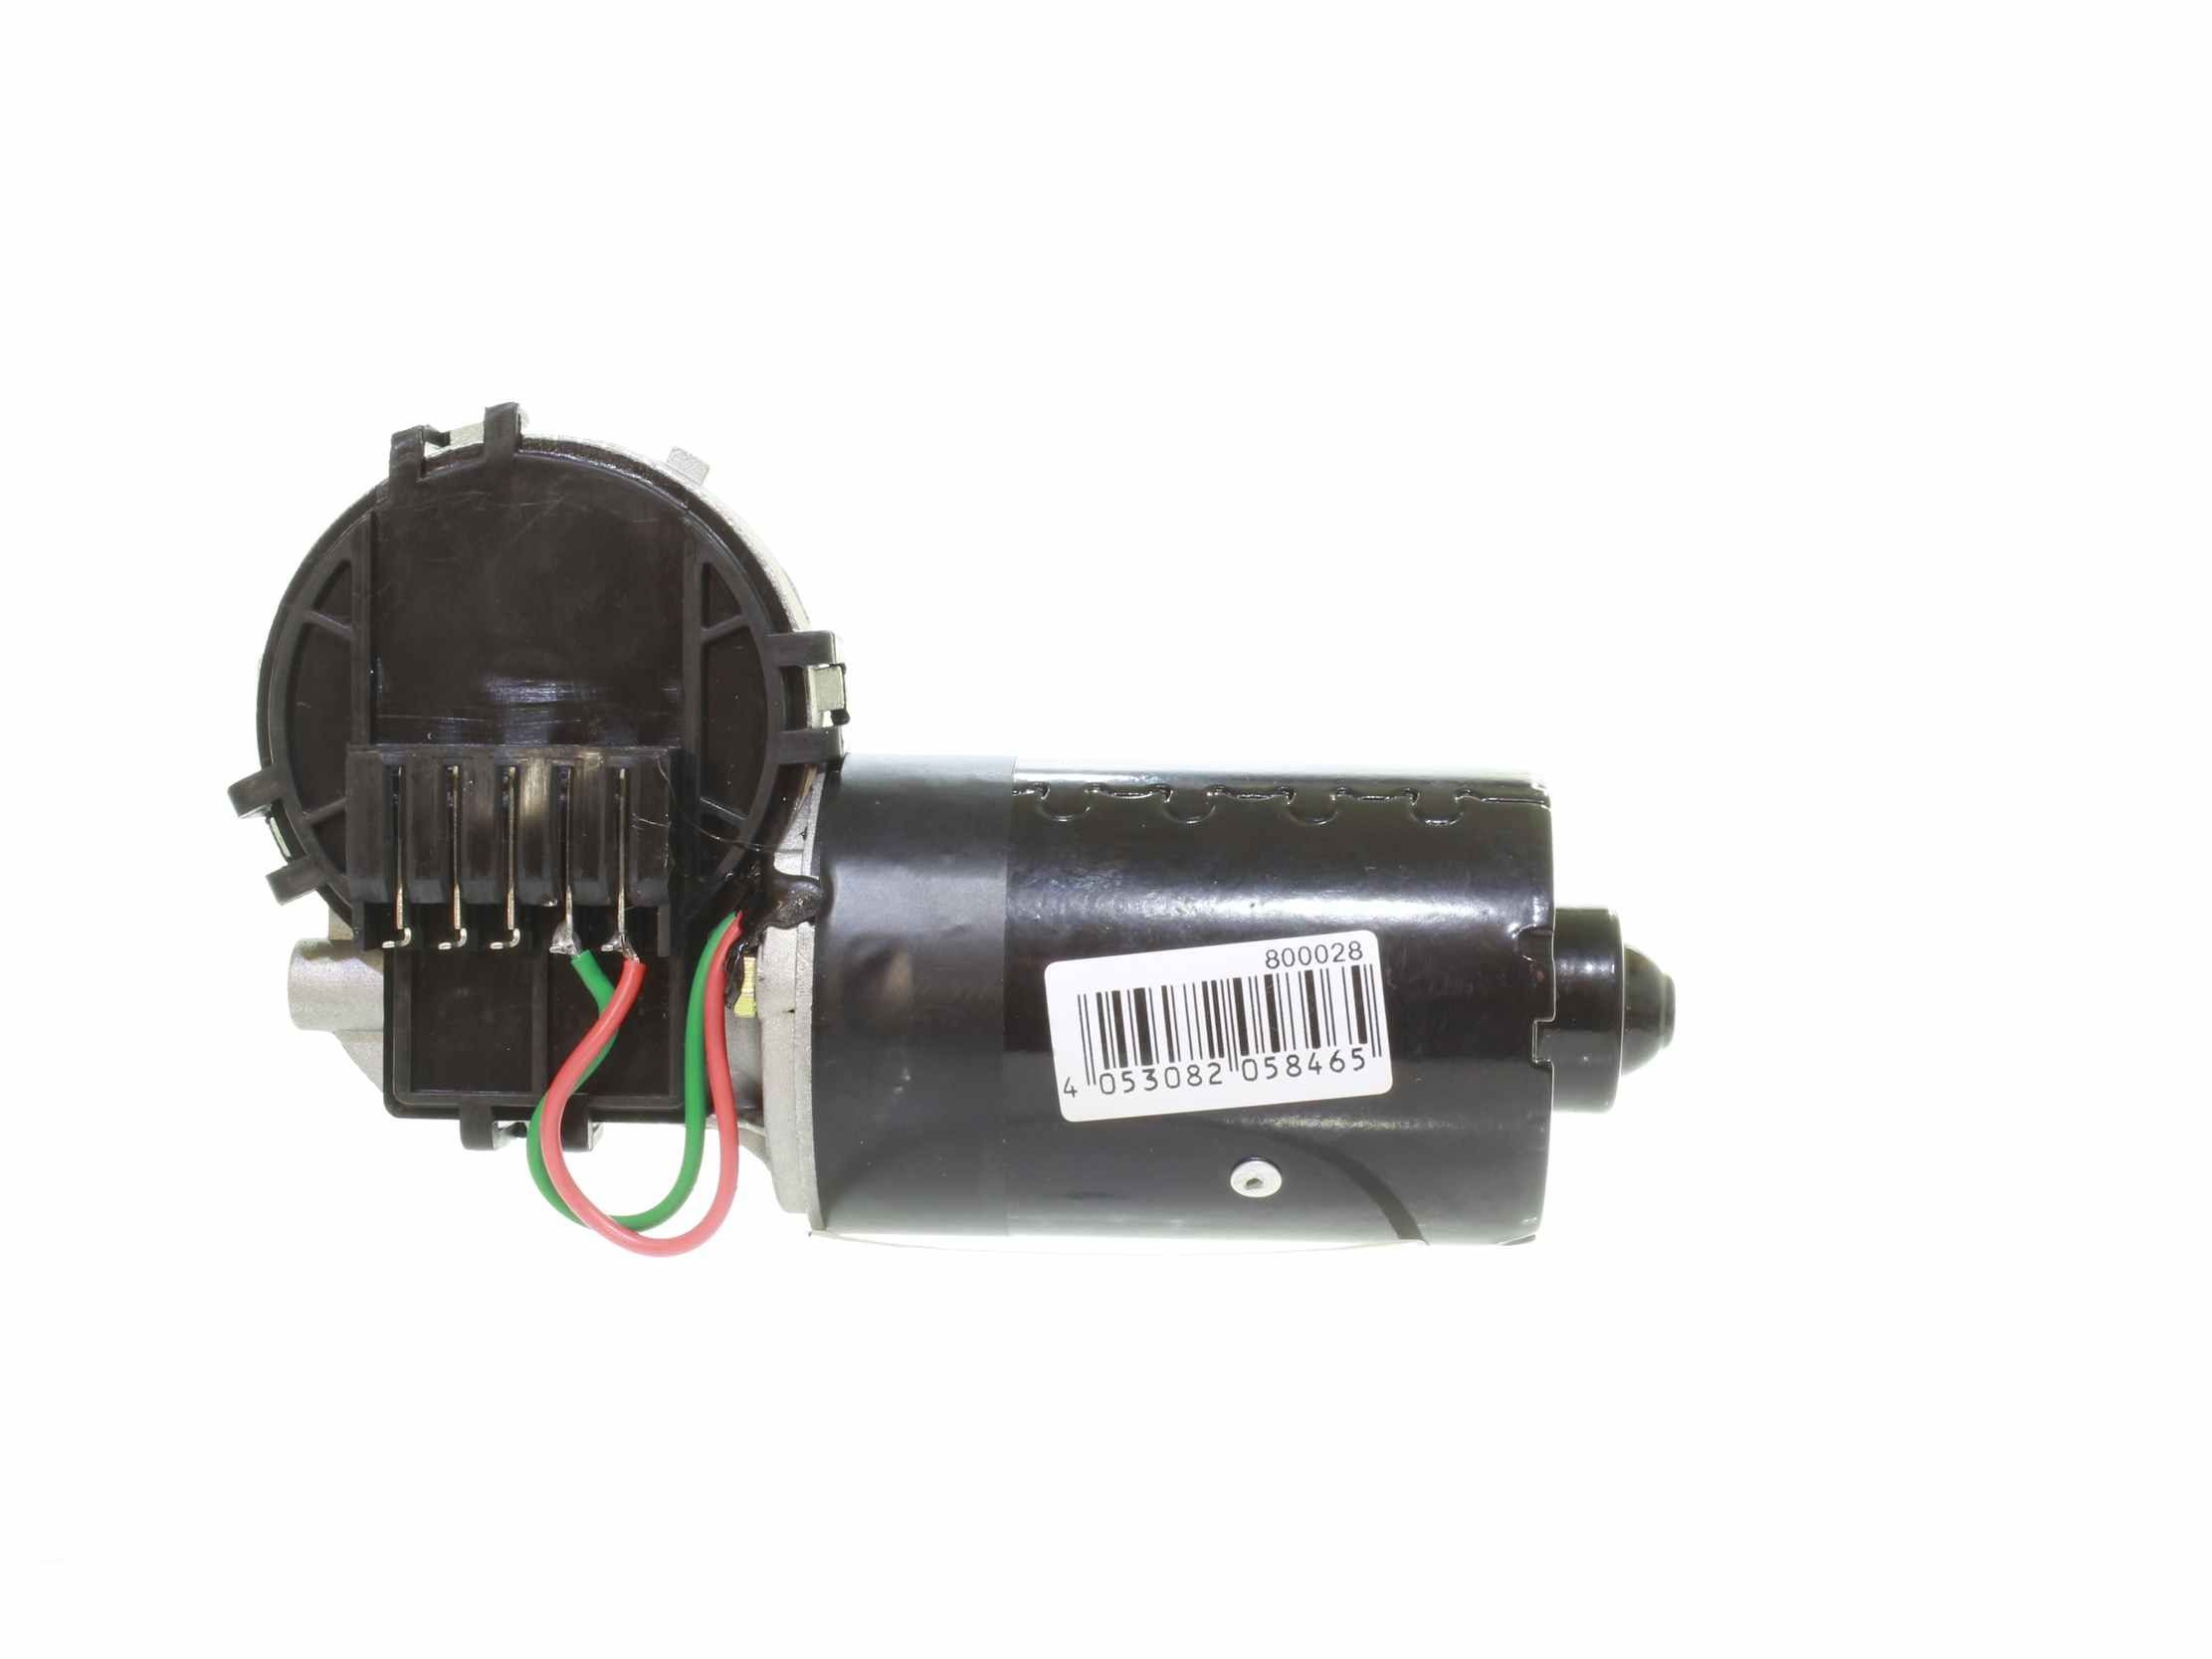 ALANKO 800028 Wiper motors 12V, Front, for left-hand/right-hand drive vehicles